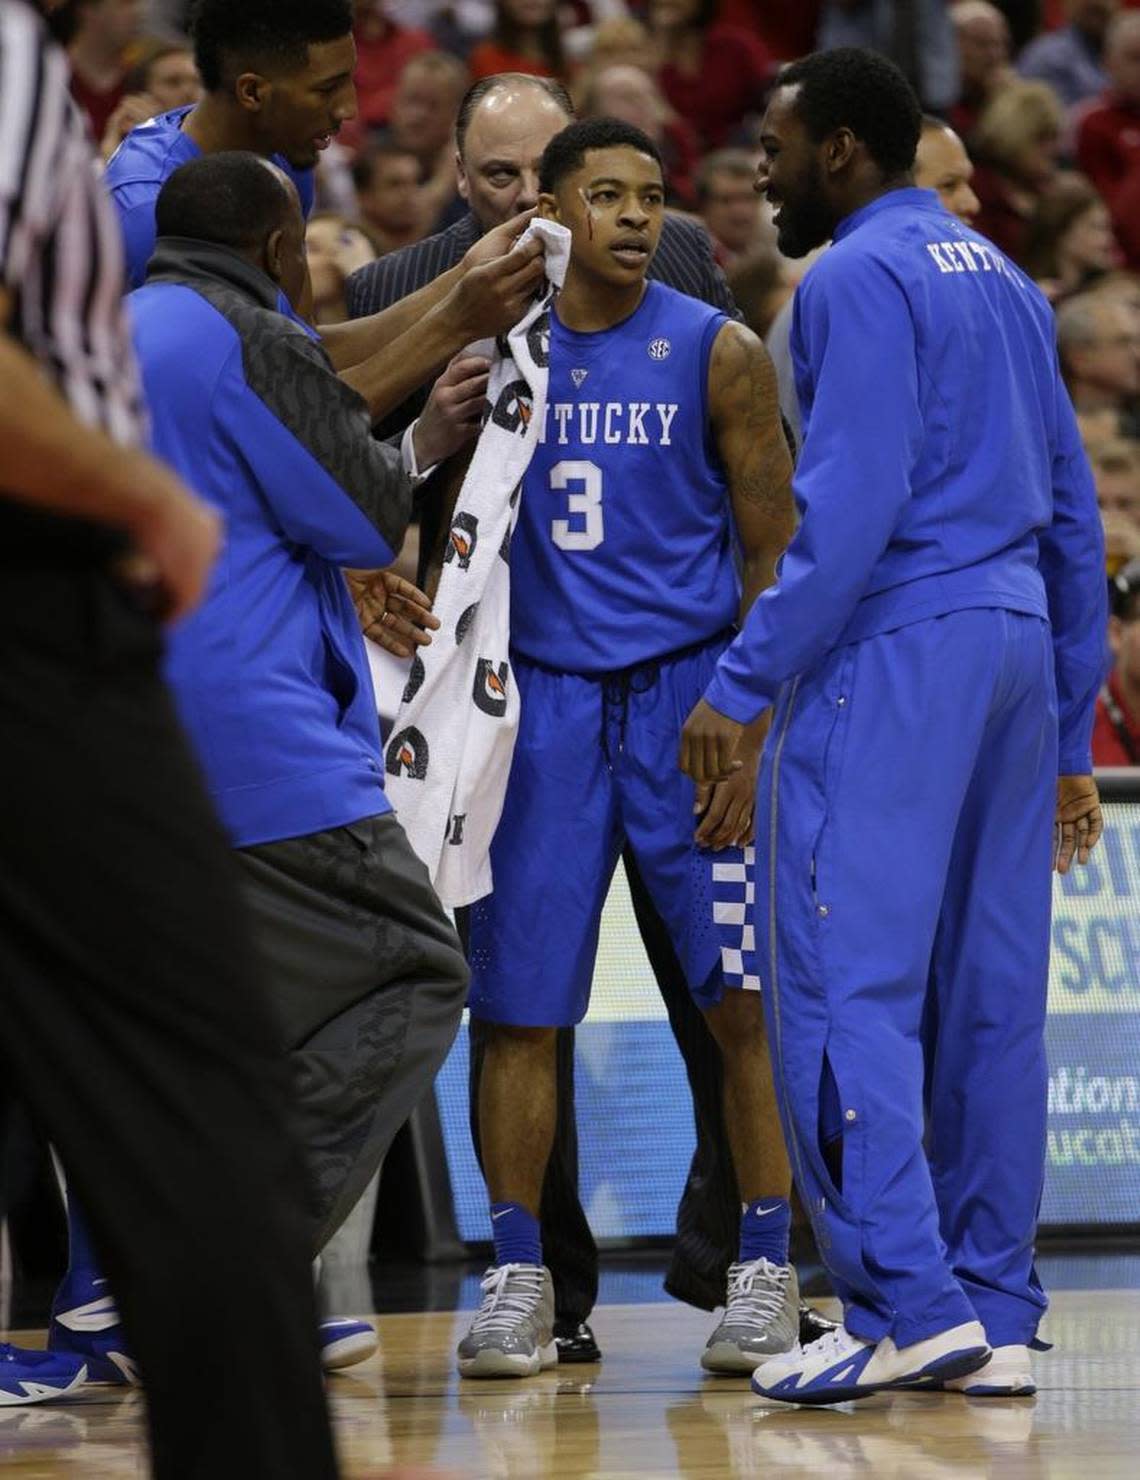 Kentucky guard Tyler Ulis had blood wiped from his eye in UK’s 58-50 victory over Louisville during the 2014-15 season. Ulis was a key player on UK’s 2015 Final Four team as a freshman, then came back and won both SEC Player of the Year and SEC Defensive Player of the Year in 2015-16.